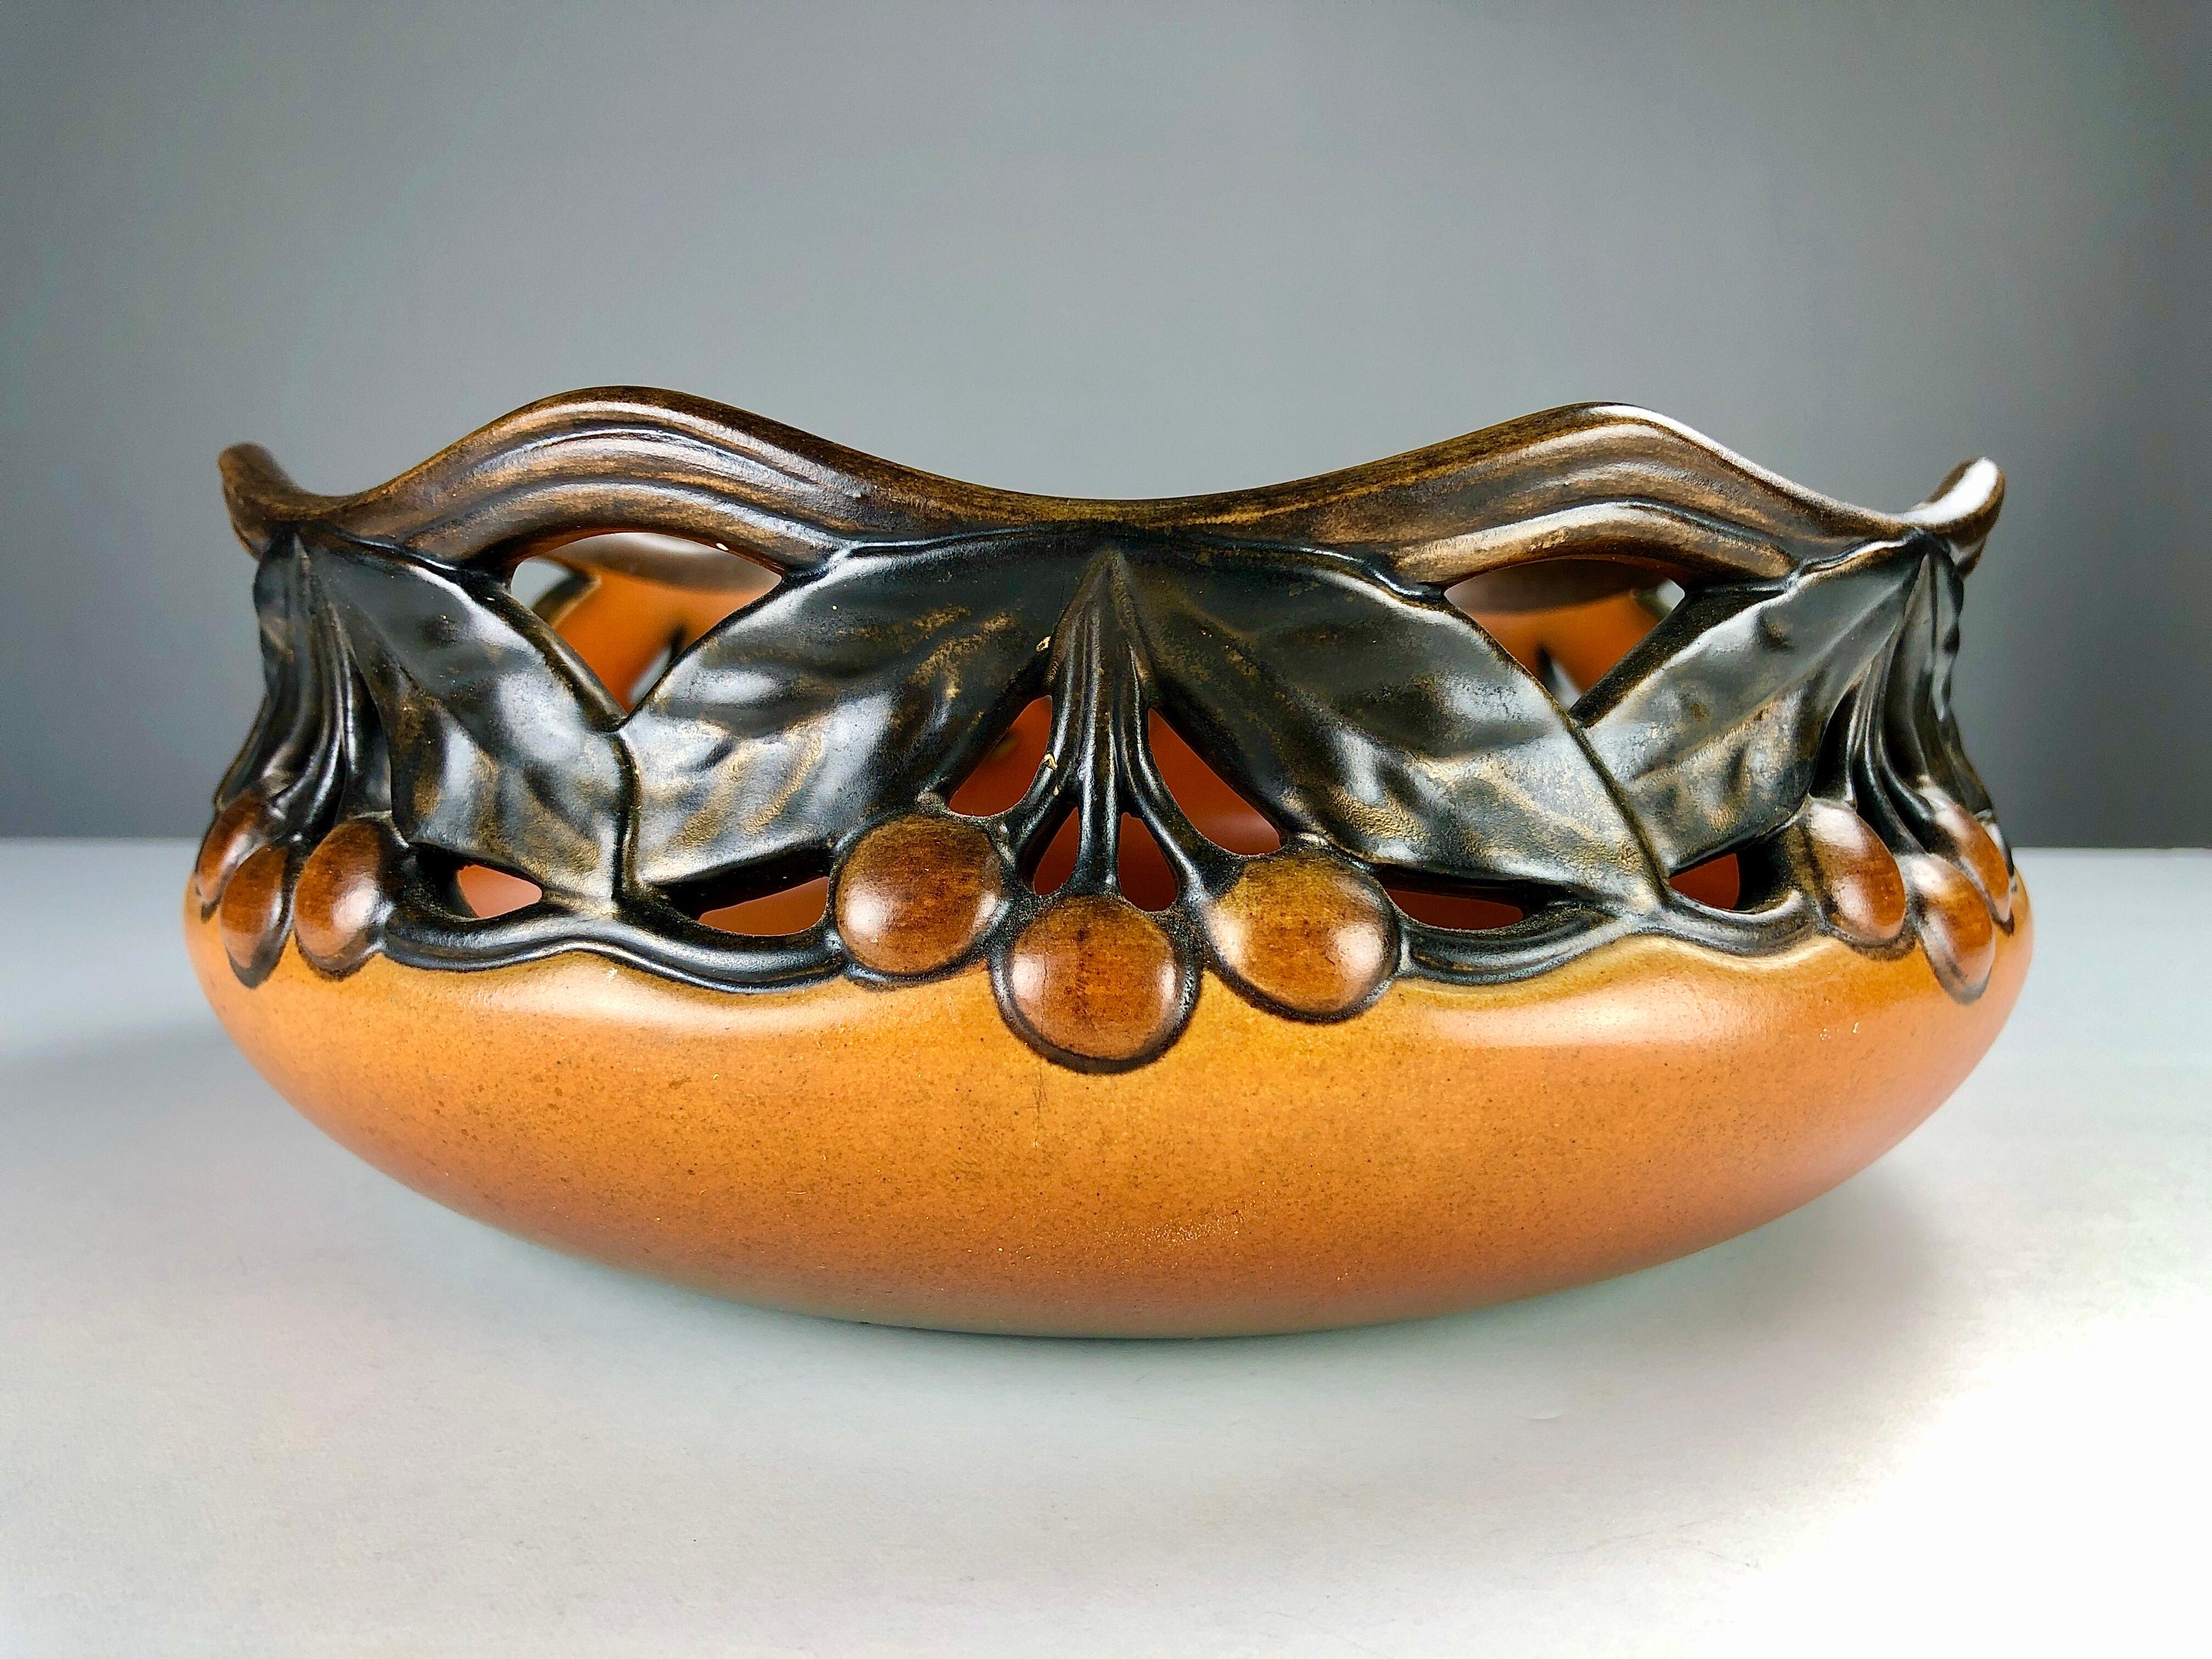 Hand crafted Art Nouveau bowl designed by the Danish sculptor Karen Hagen for P. Ipsens Enke in 1909.

The art nuveau cherry bowl is in excellent condition.

P. Ipsens Enke (1843 - 1955) was a very succesfull company that especially during the first